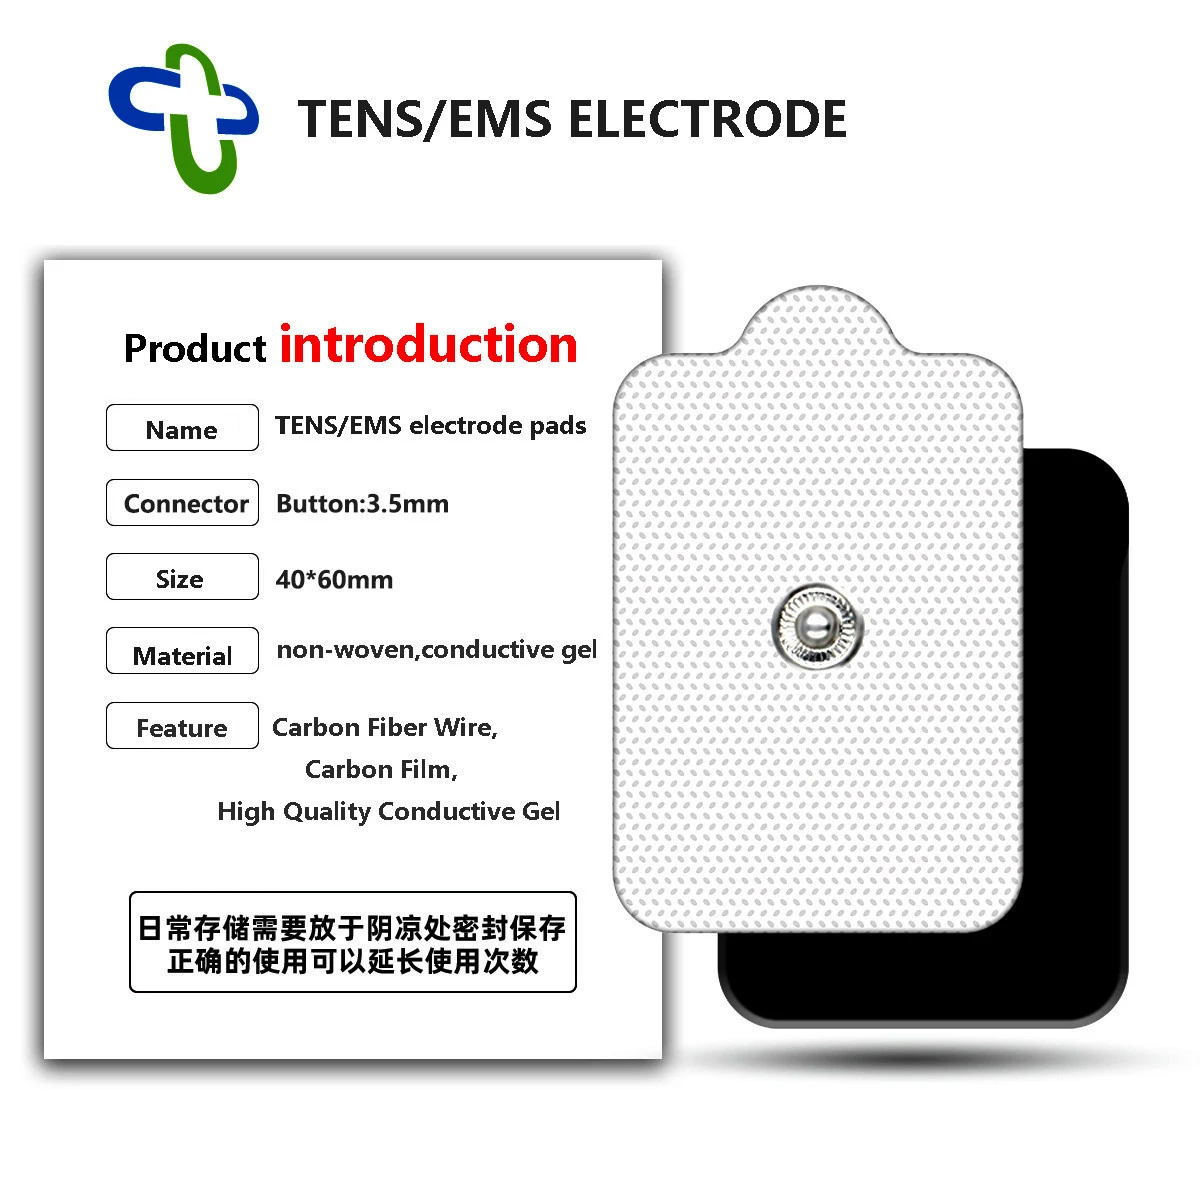 https://img2.tradewheel.com/uploads/images/products/9/9/tens-pad-button-35mmampsize46cm-non-woven-cloth-electrode-for-tens-unit-snap-electrodes-pads-for-physical-therapy-equipments1-0371918001620631868.jpg.webp